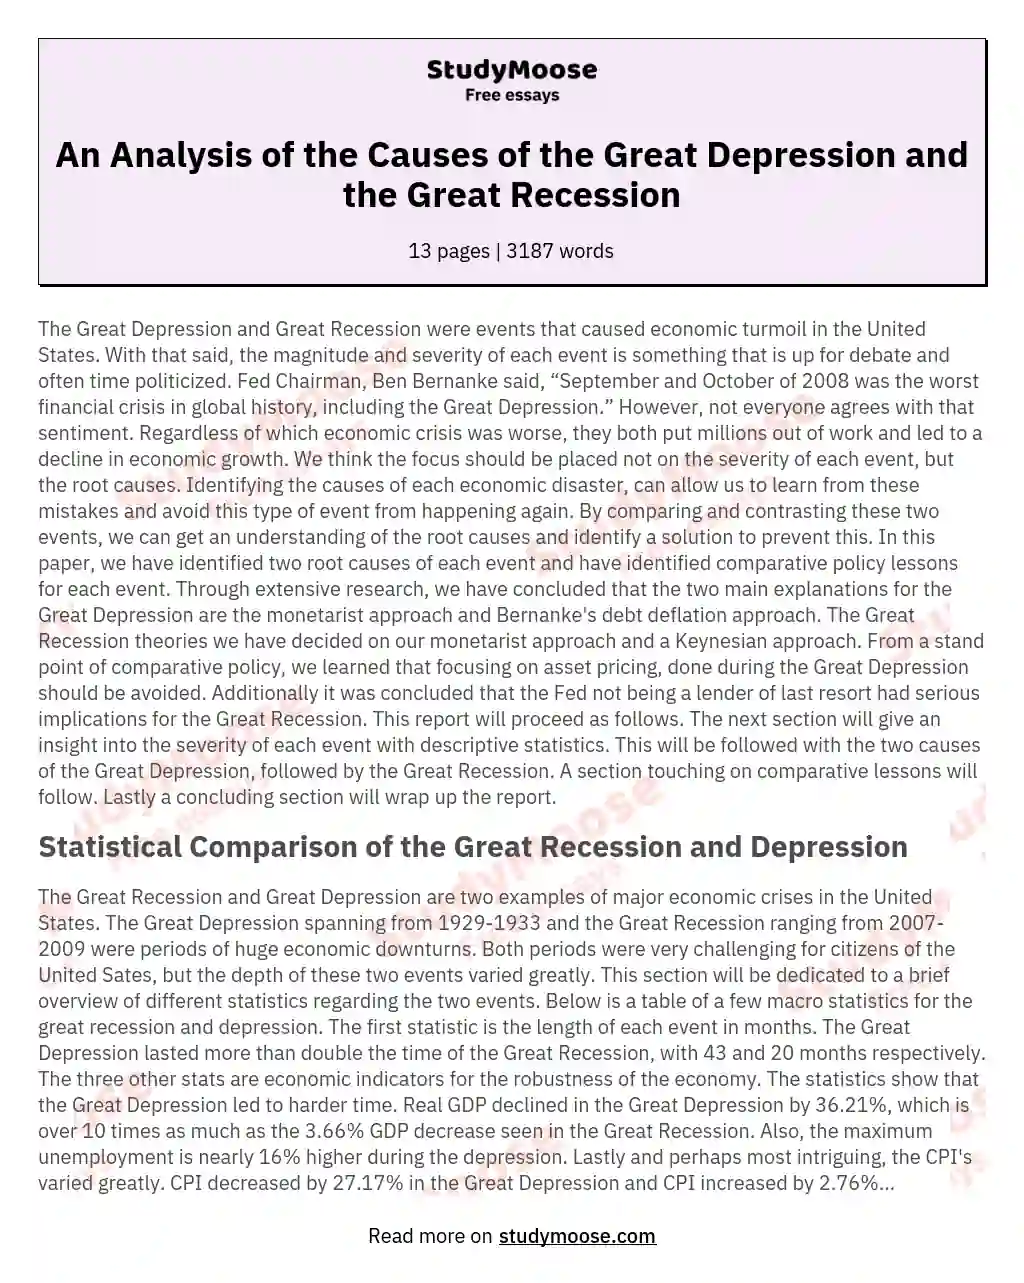 An Analysis of the Causes of the Great Depression and the Great Recession essay